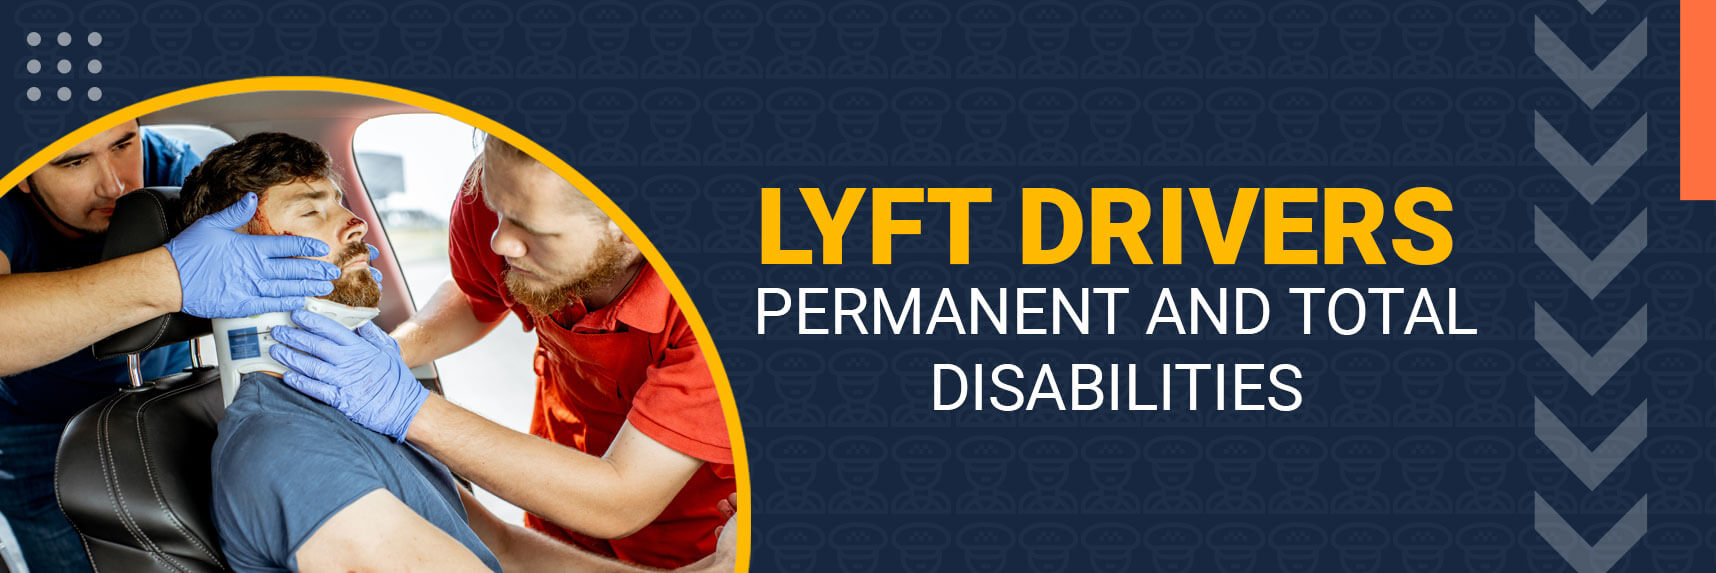 LYFT DRIVERS WITH PERMANENT AND TOTAL DISABILITIES